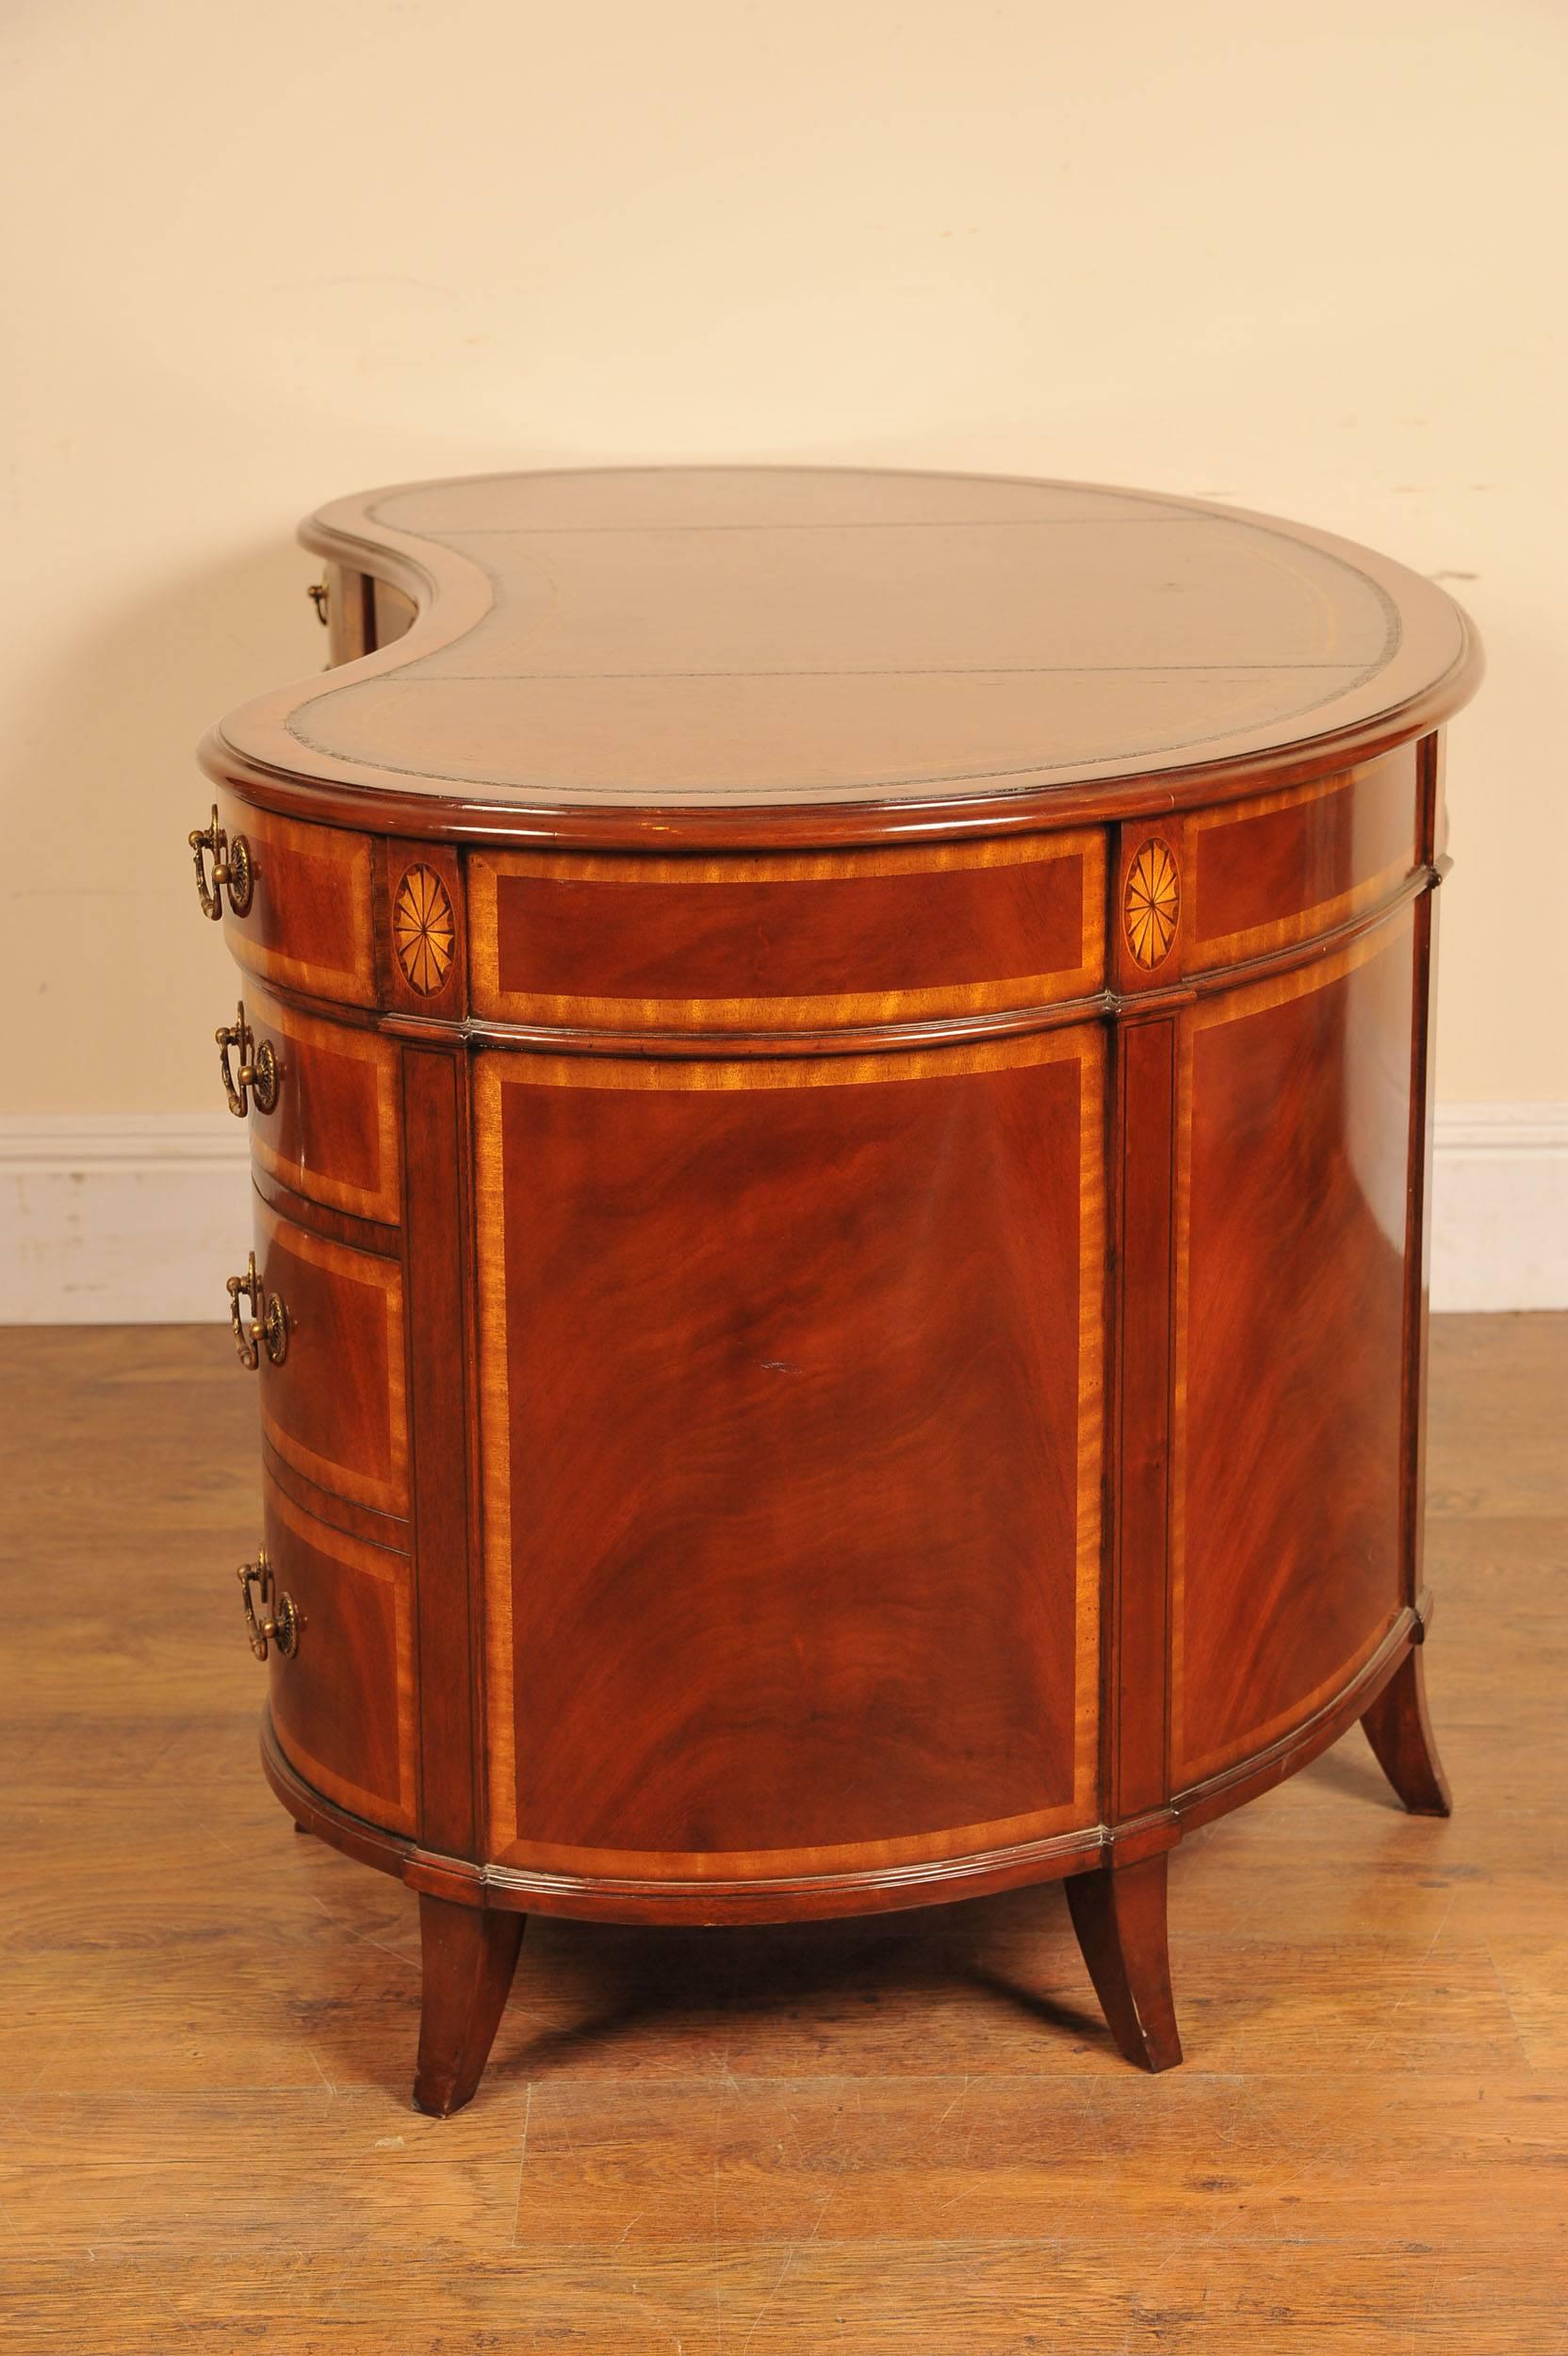 Regency Style Mahogany Kidney Desk Furniture In Good Condition For Sale In Potters Bar, Herts